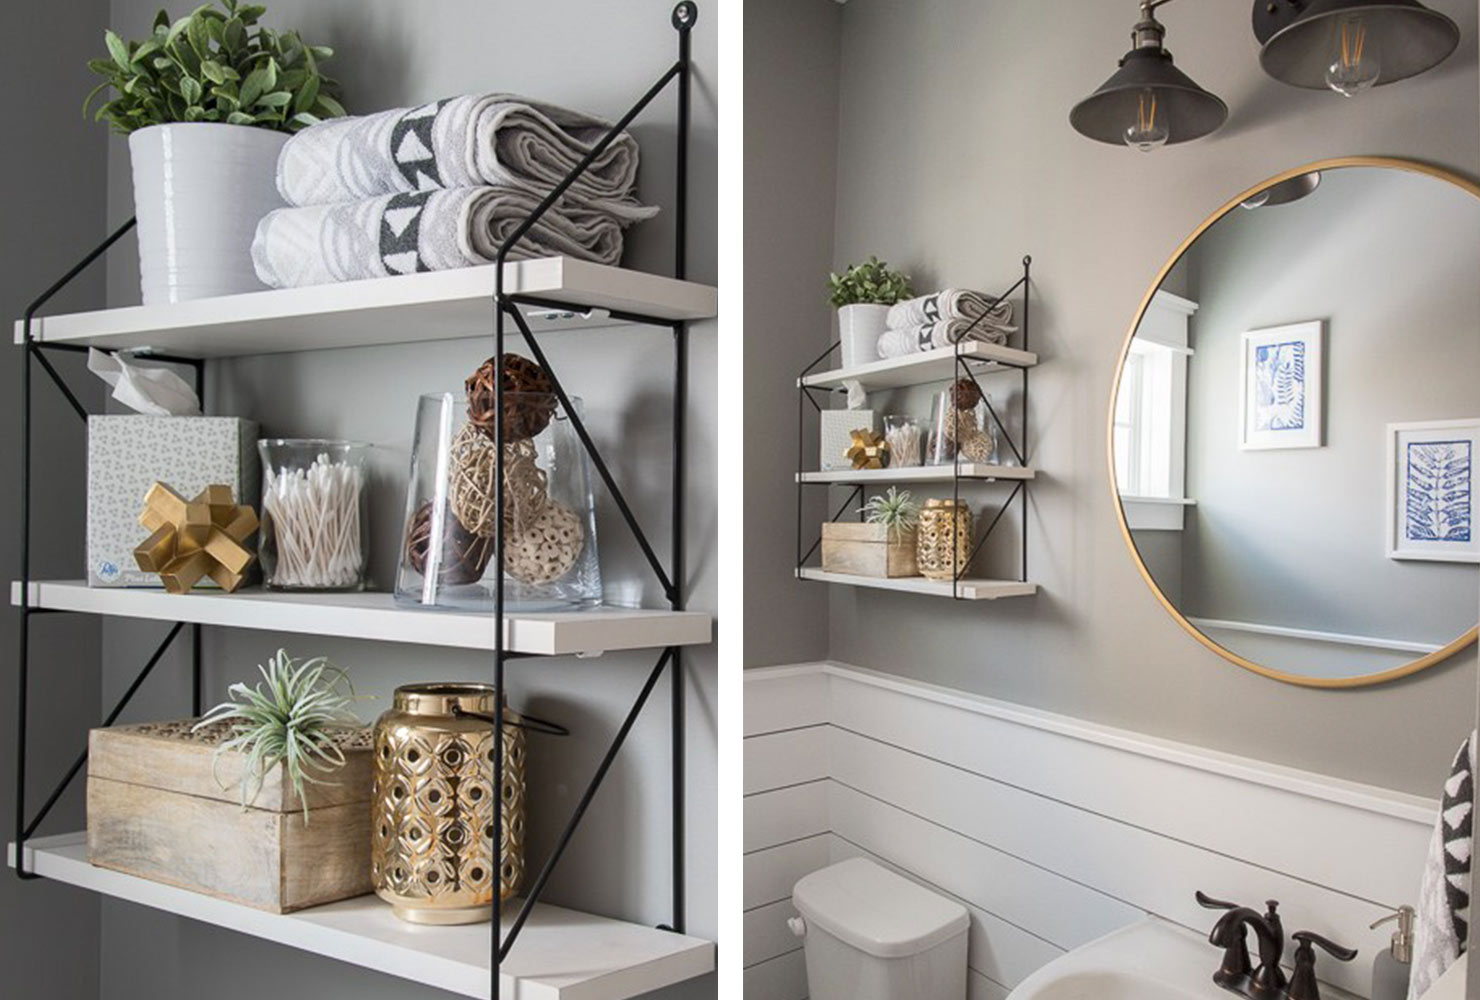 76 Ways To Decorate A Small Bathroom | Shutterfly